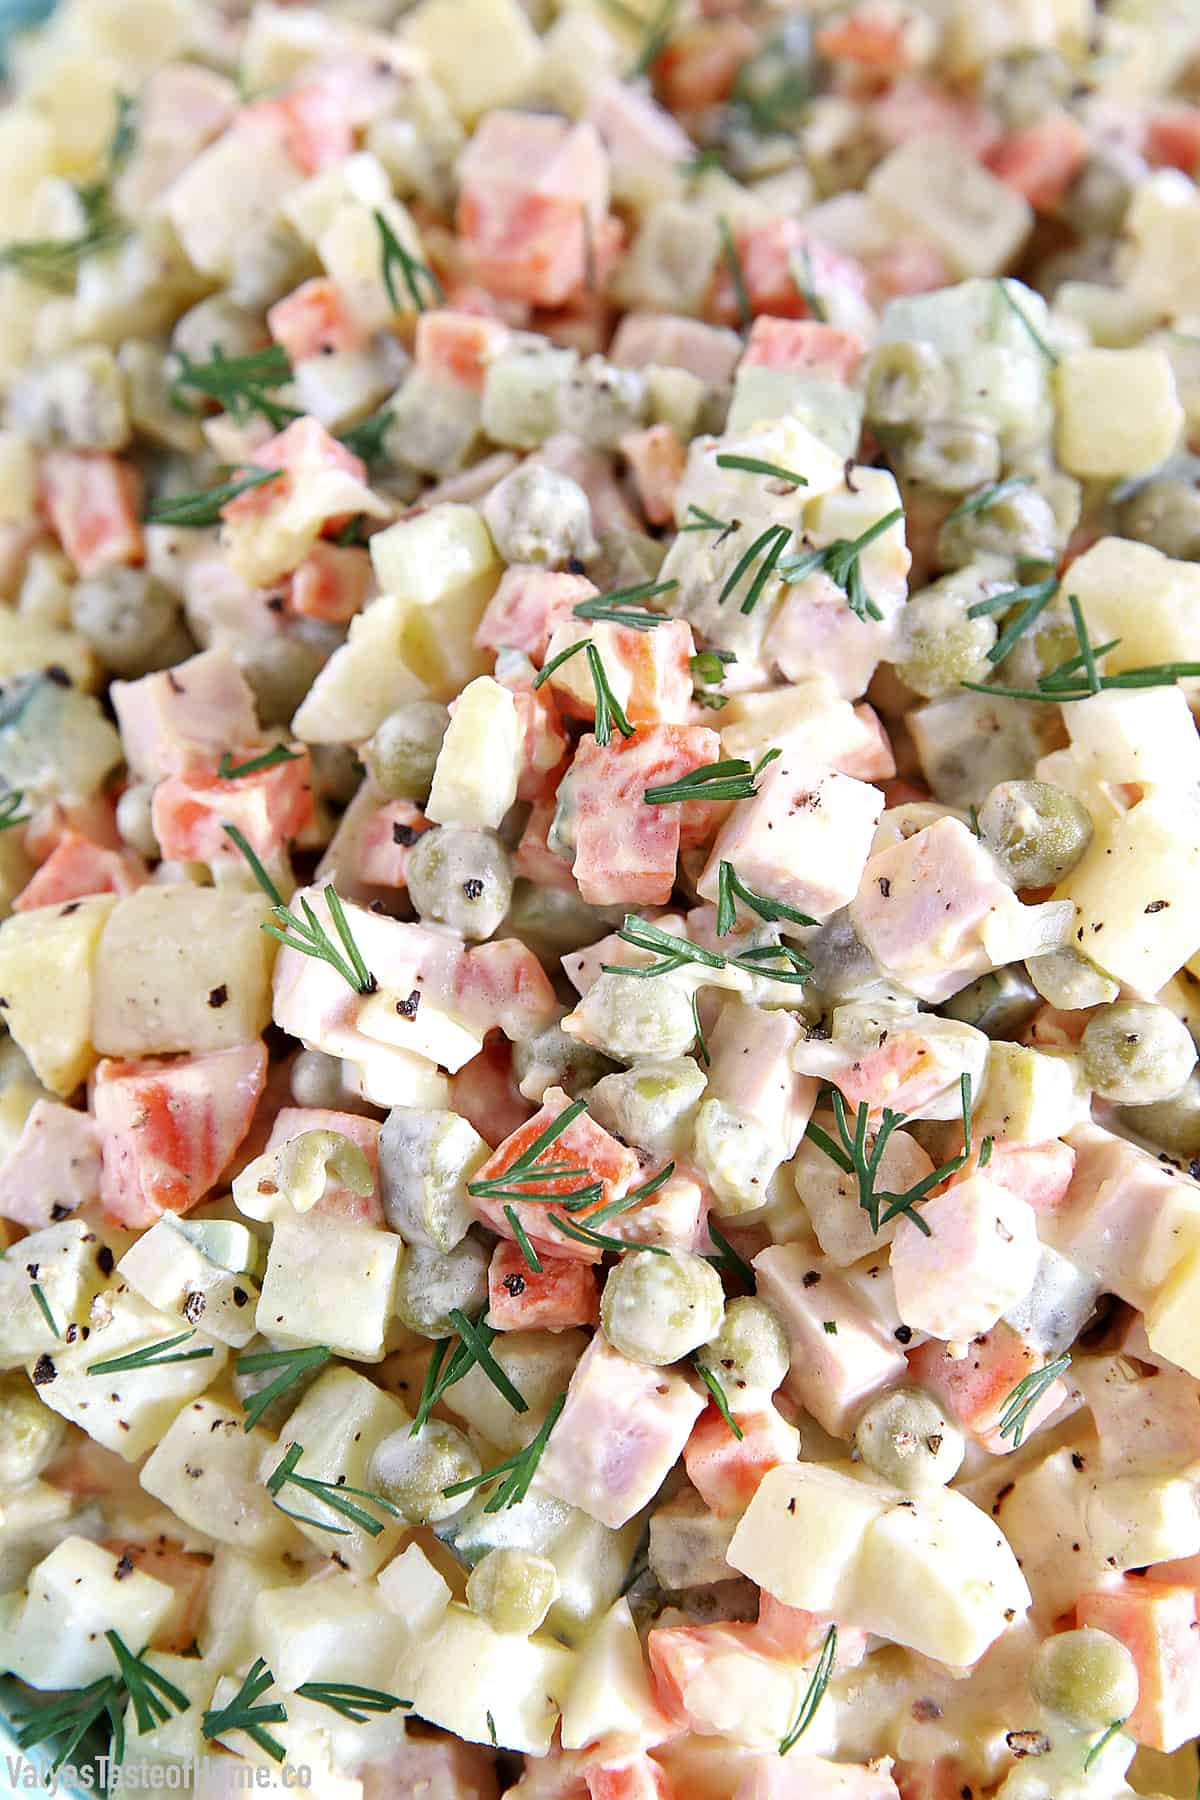 This Classic Potato Salad Recipe (Olivie) is a must-have on any holiday table. It's very easy to make, very hearty, and craveable. Just cook some veggies and eggs, chop them up, add mayo, salt, and pepper and you have a very delicious salad.